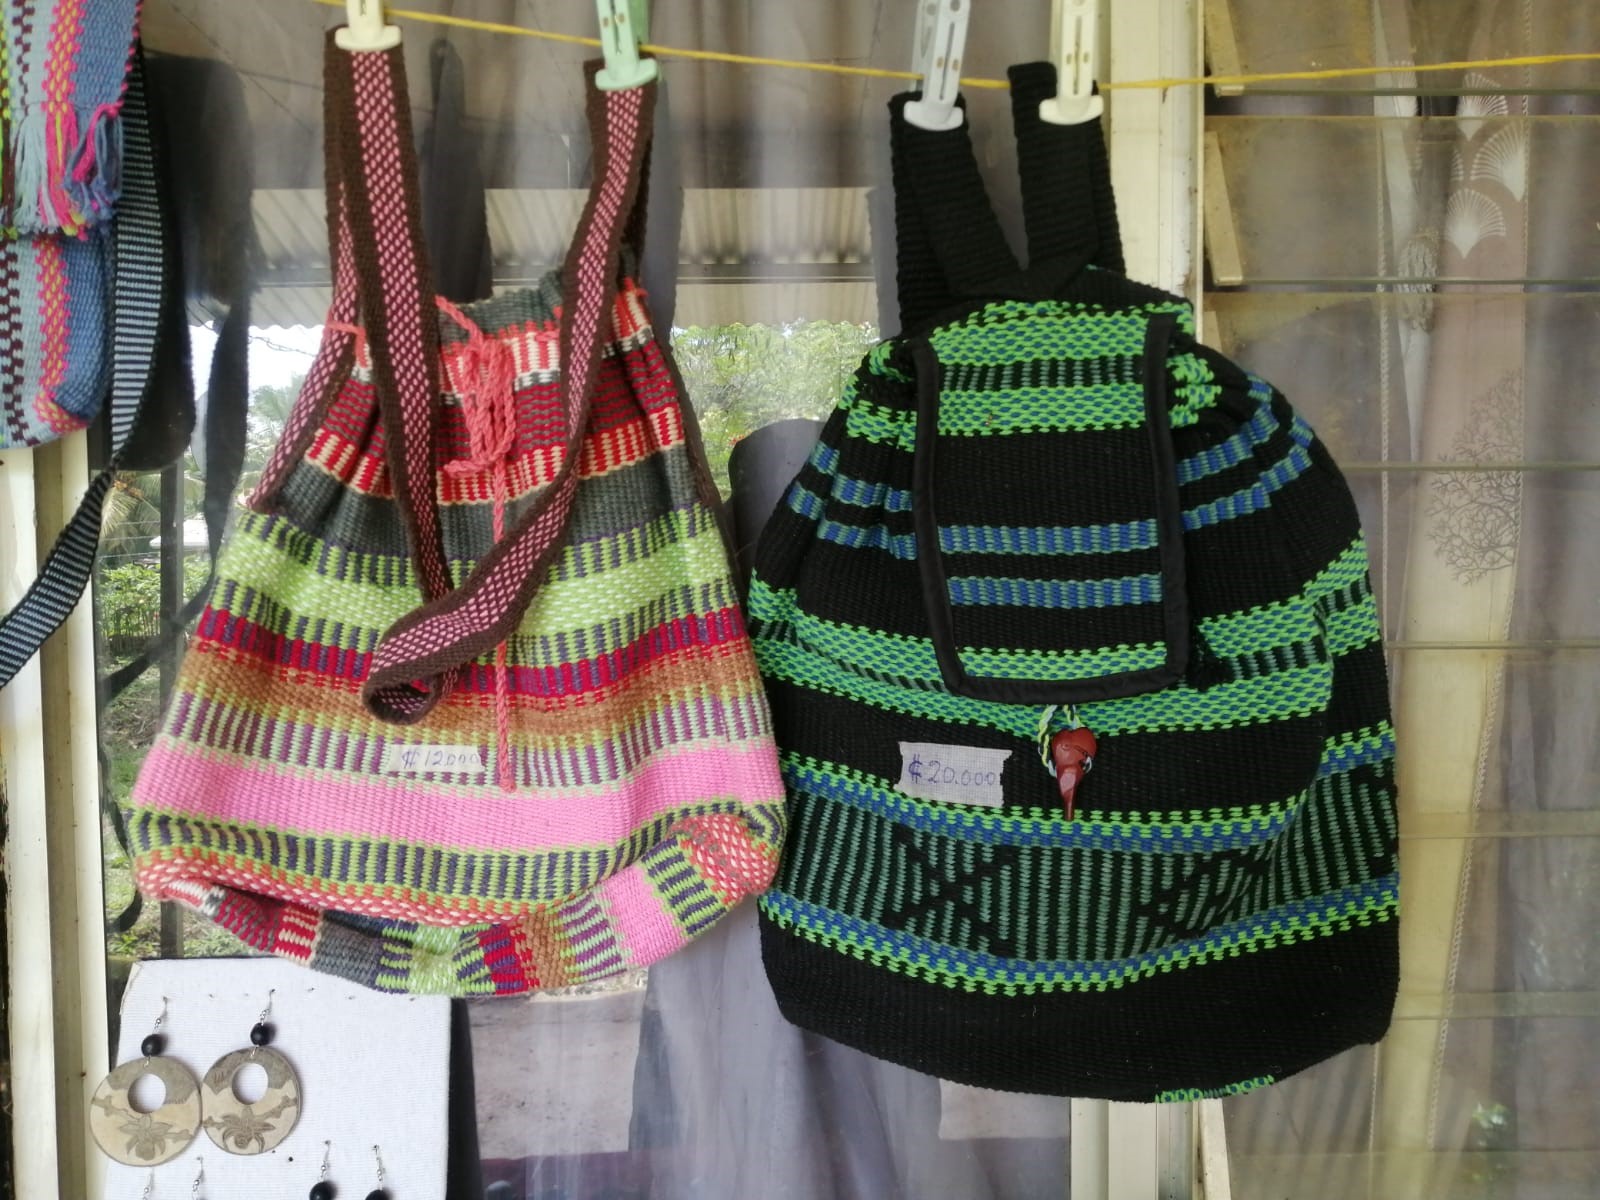 Traditional Weaved Back packs hanging from clothing lines